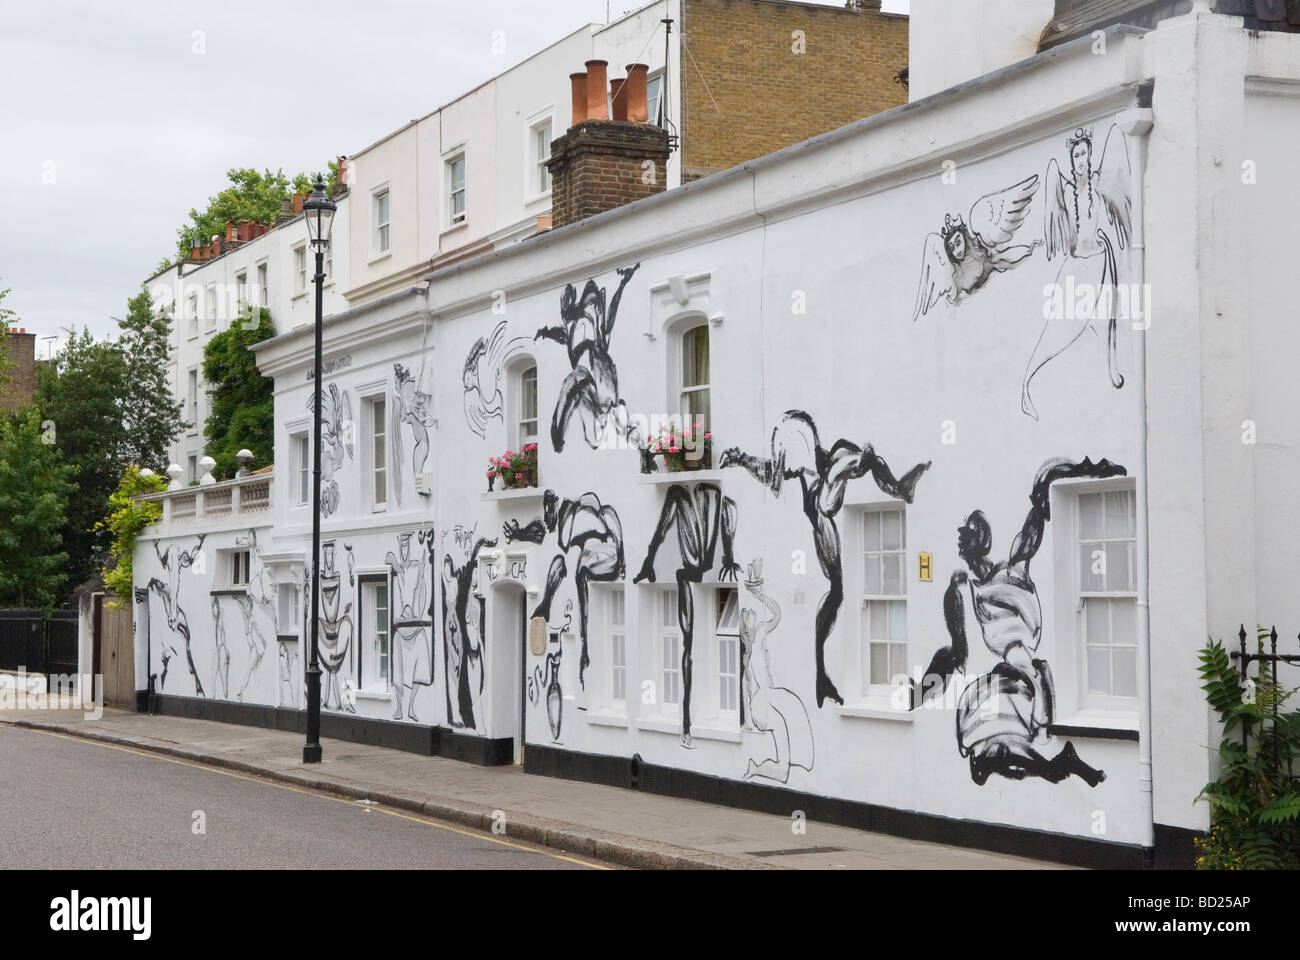 Chelsea Arts Club London redecoration  their building in Old Church Street art work murals by Tony Common. Temporary wall mural  HOMER SYKES Stock Photo